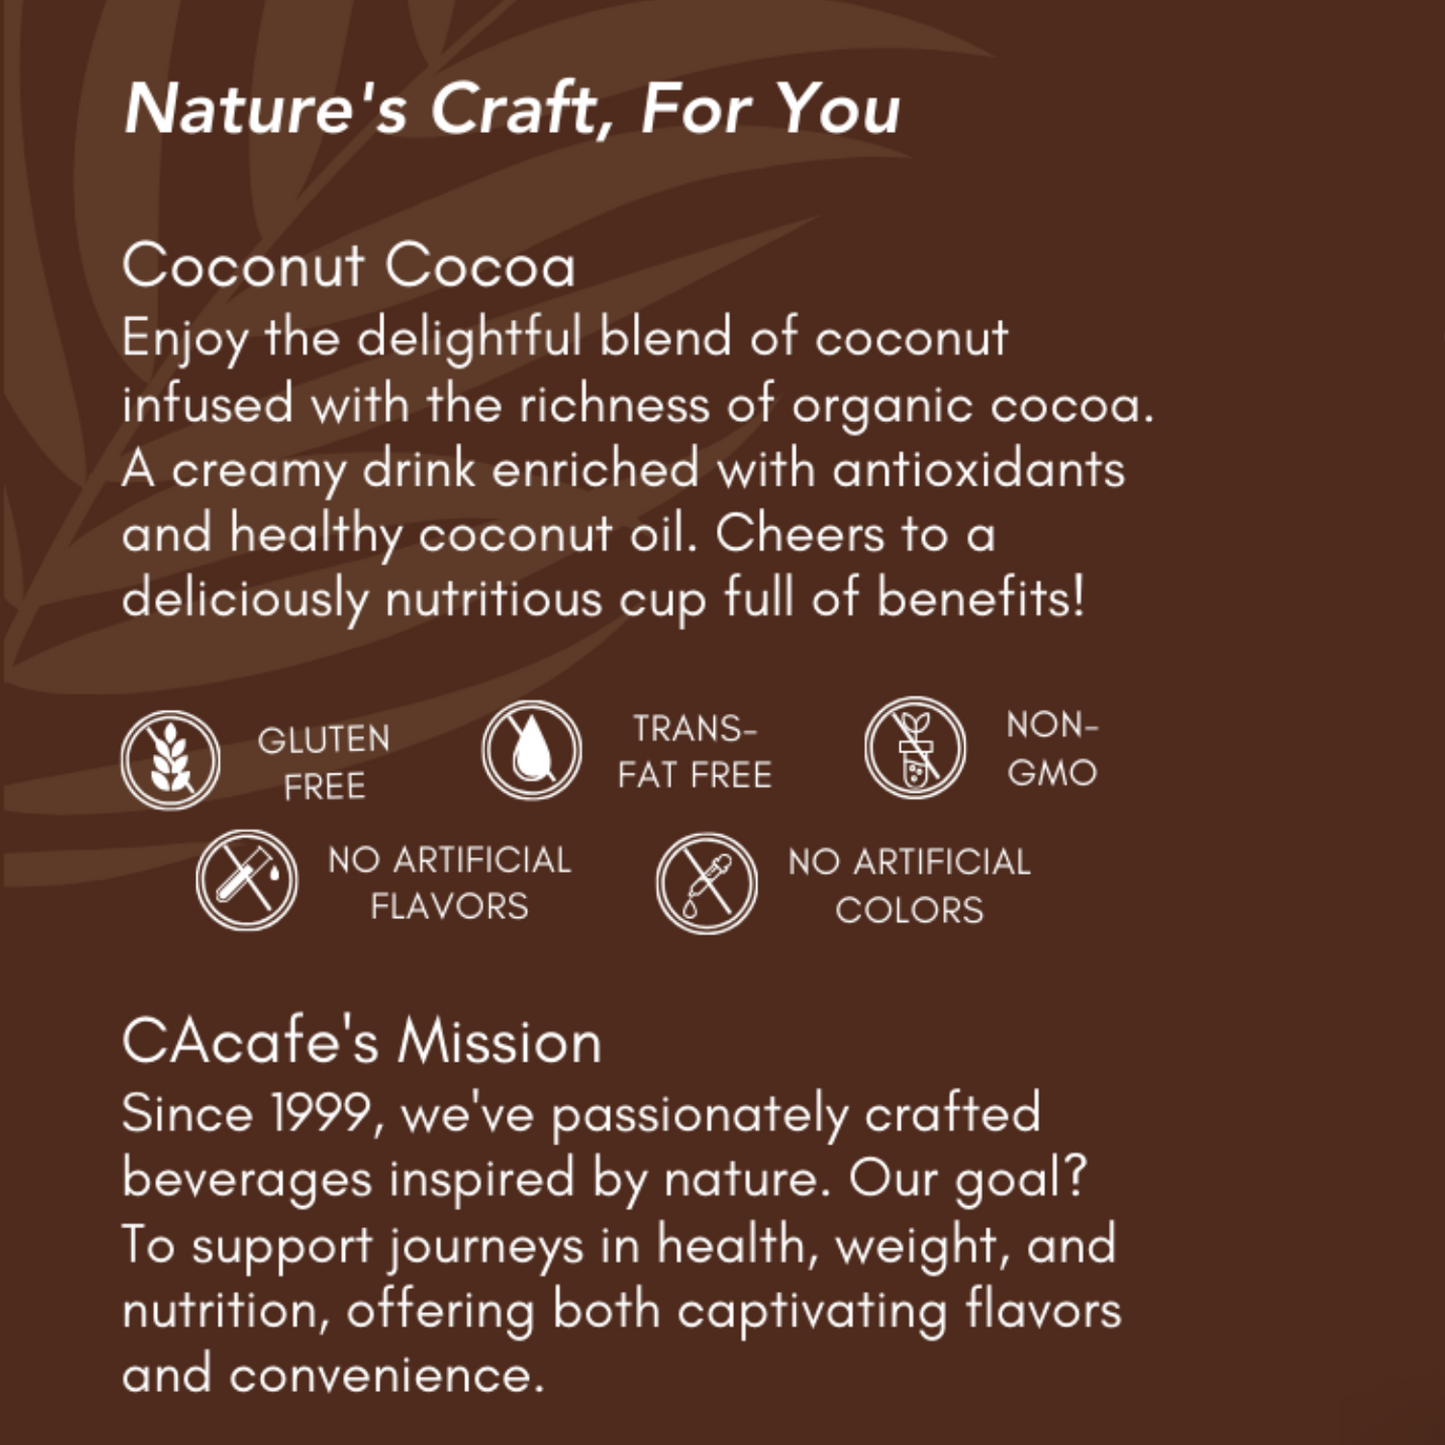 2 pack of Coconut Cocoa (New Look) _ 19.05oz each